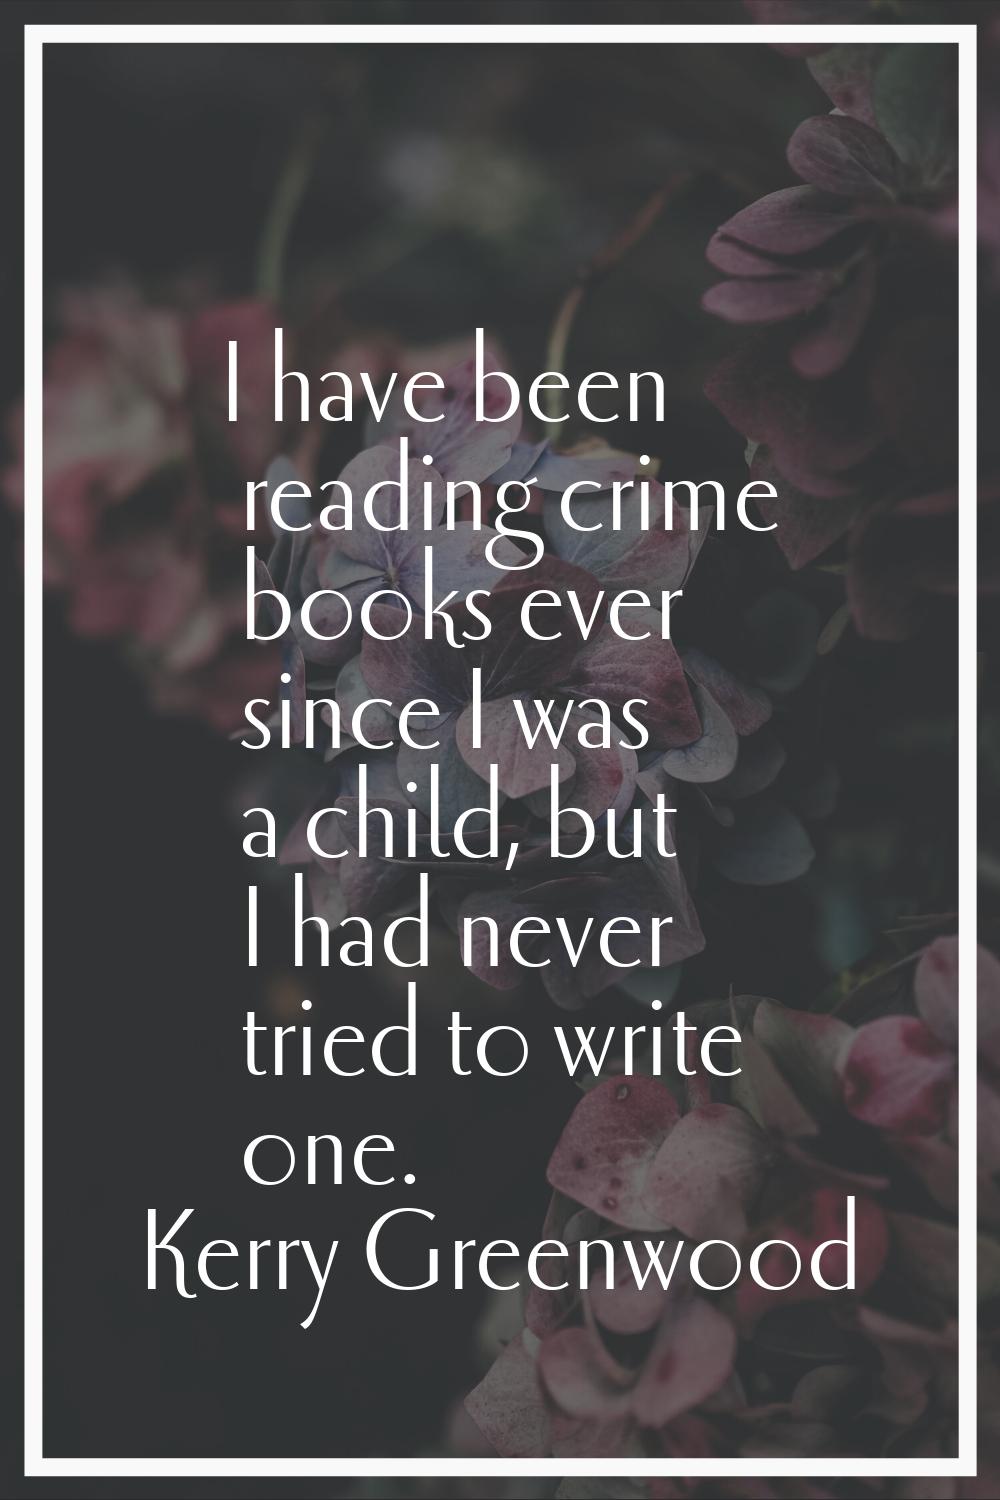 I have been reading crime books ever since I was a child, but I had never tried to write one.